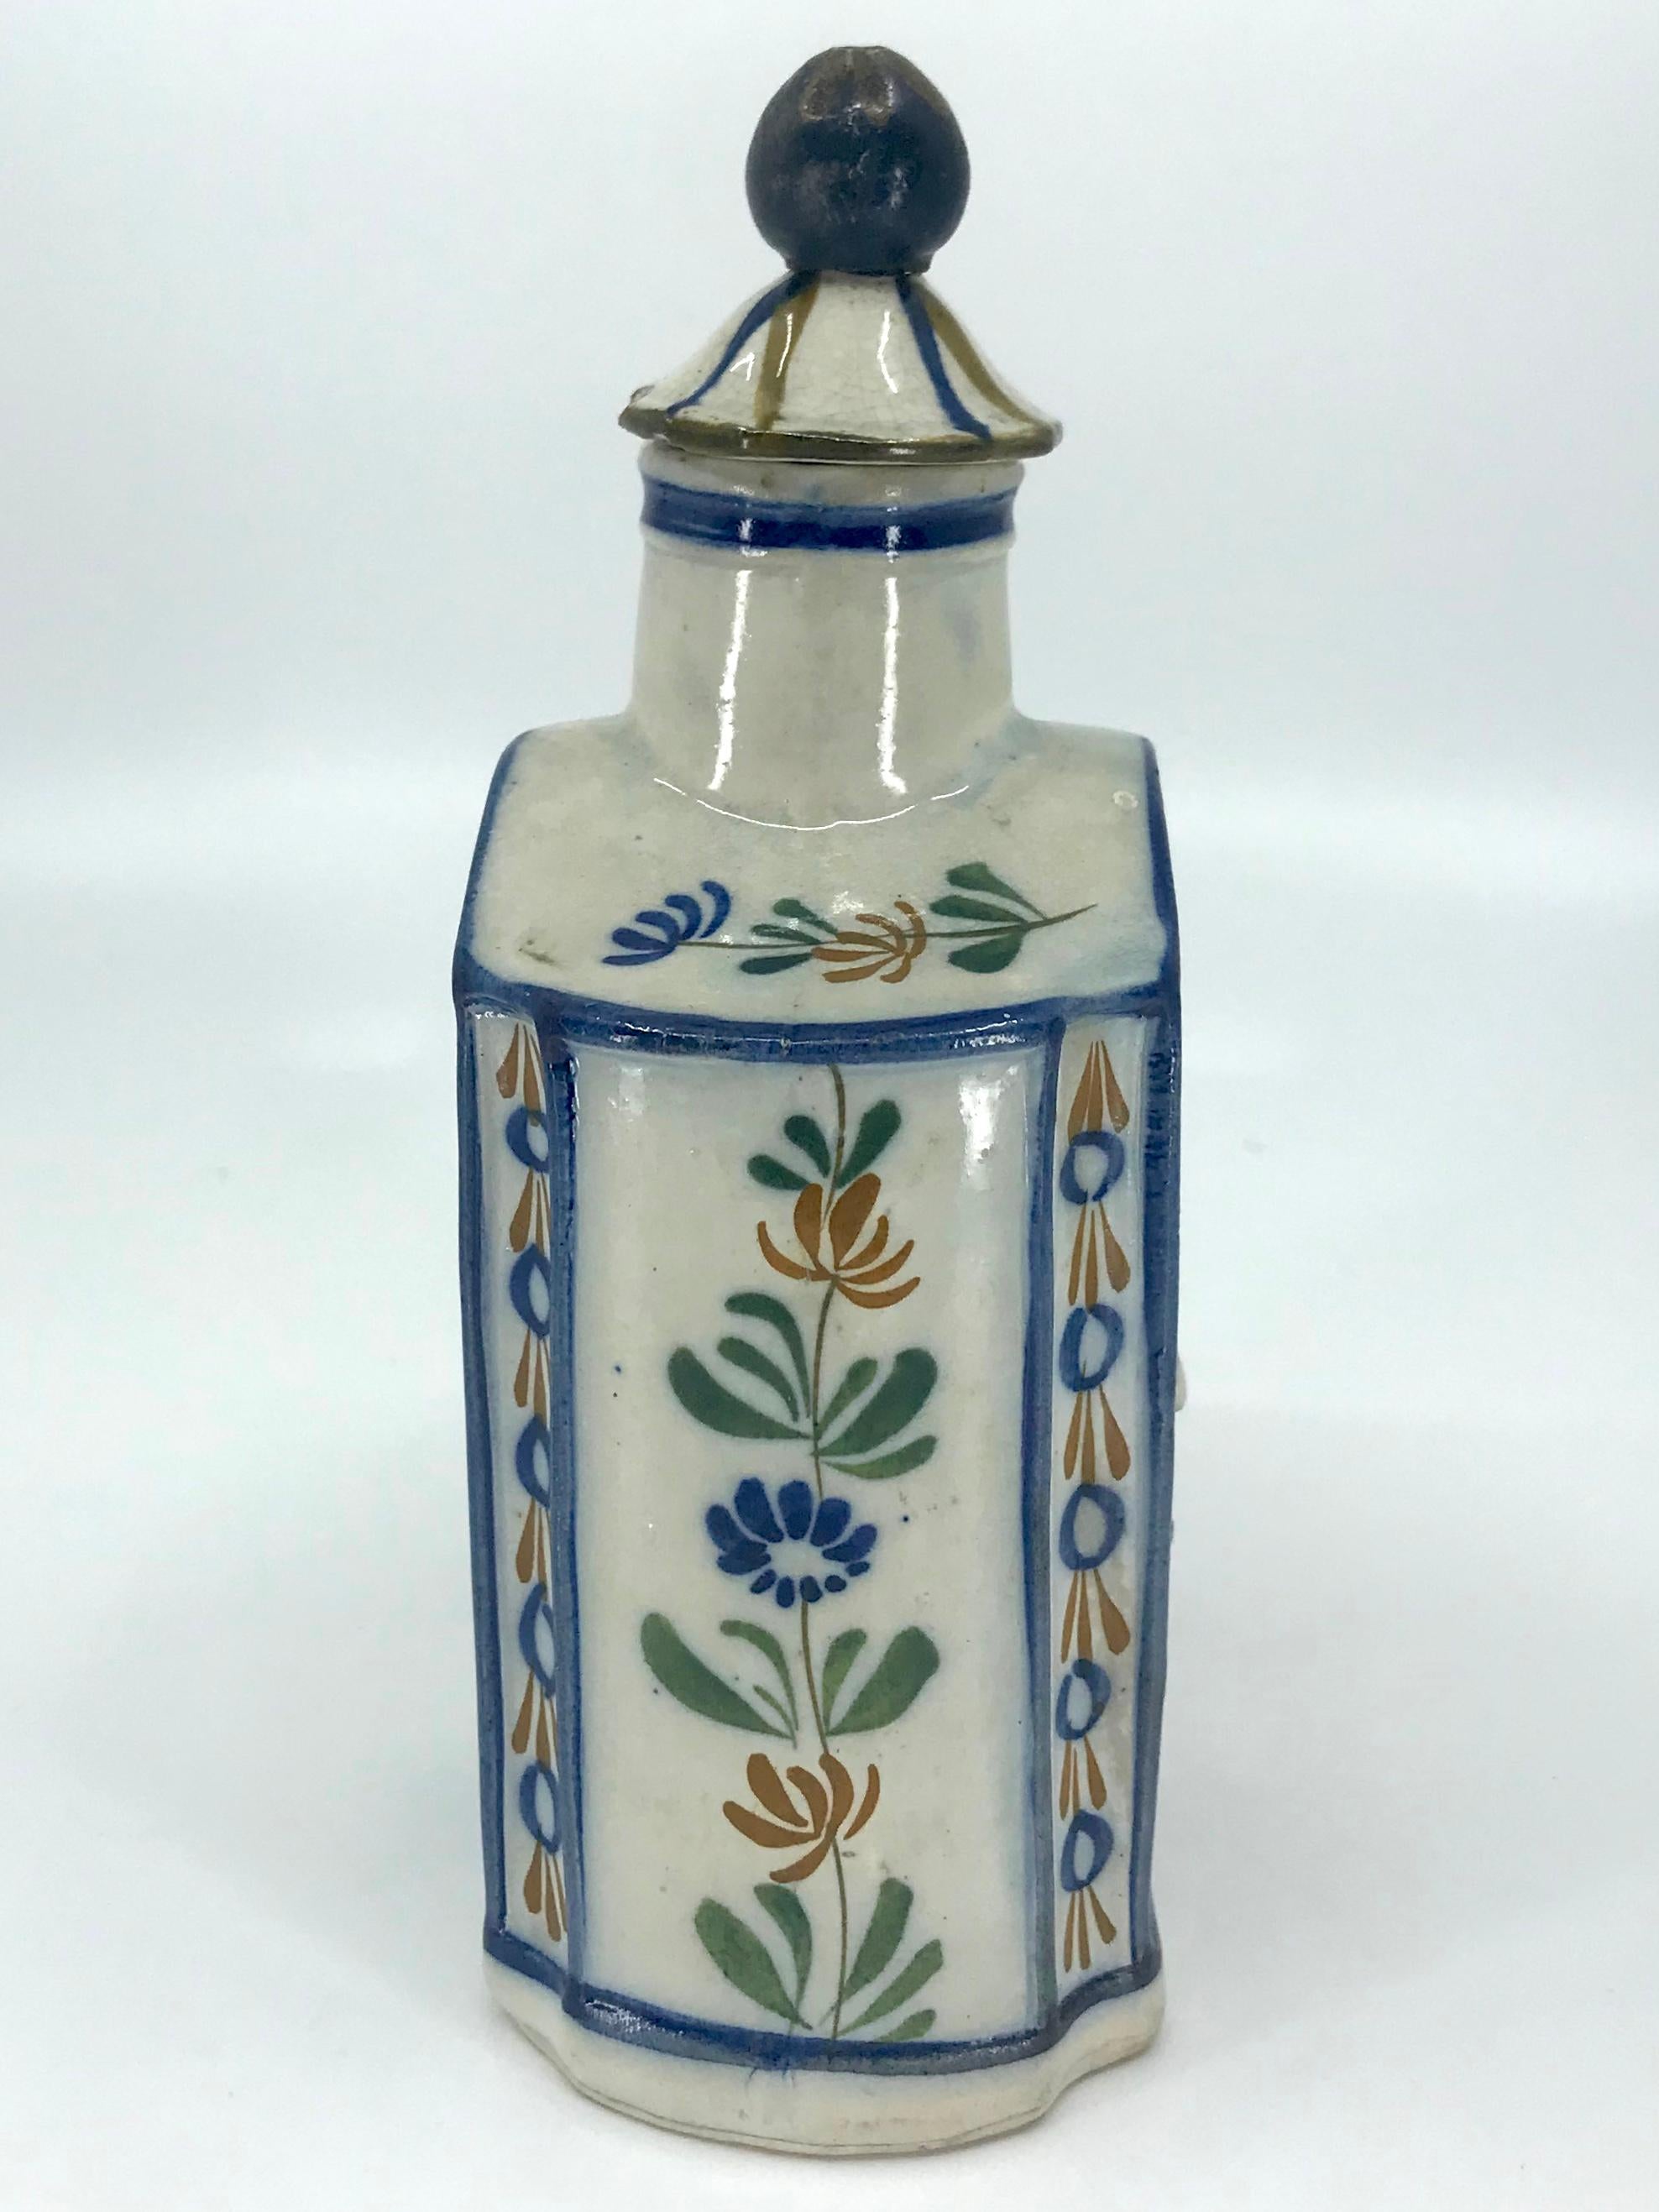 Blue and yellow chinoiserie tea caddy. Charming Prattware shaped tea canister in a blue cast paste with blue, yellow and moss green decoration featuring a chinoiserie figure in high relief and floral details on end panels with blue outlines; with an